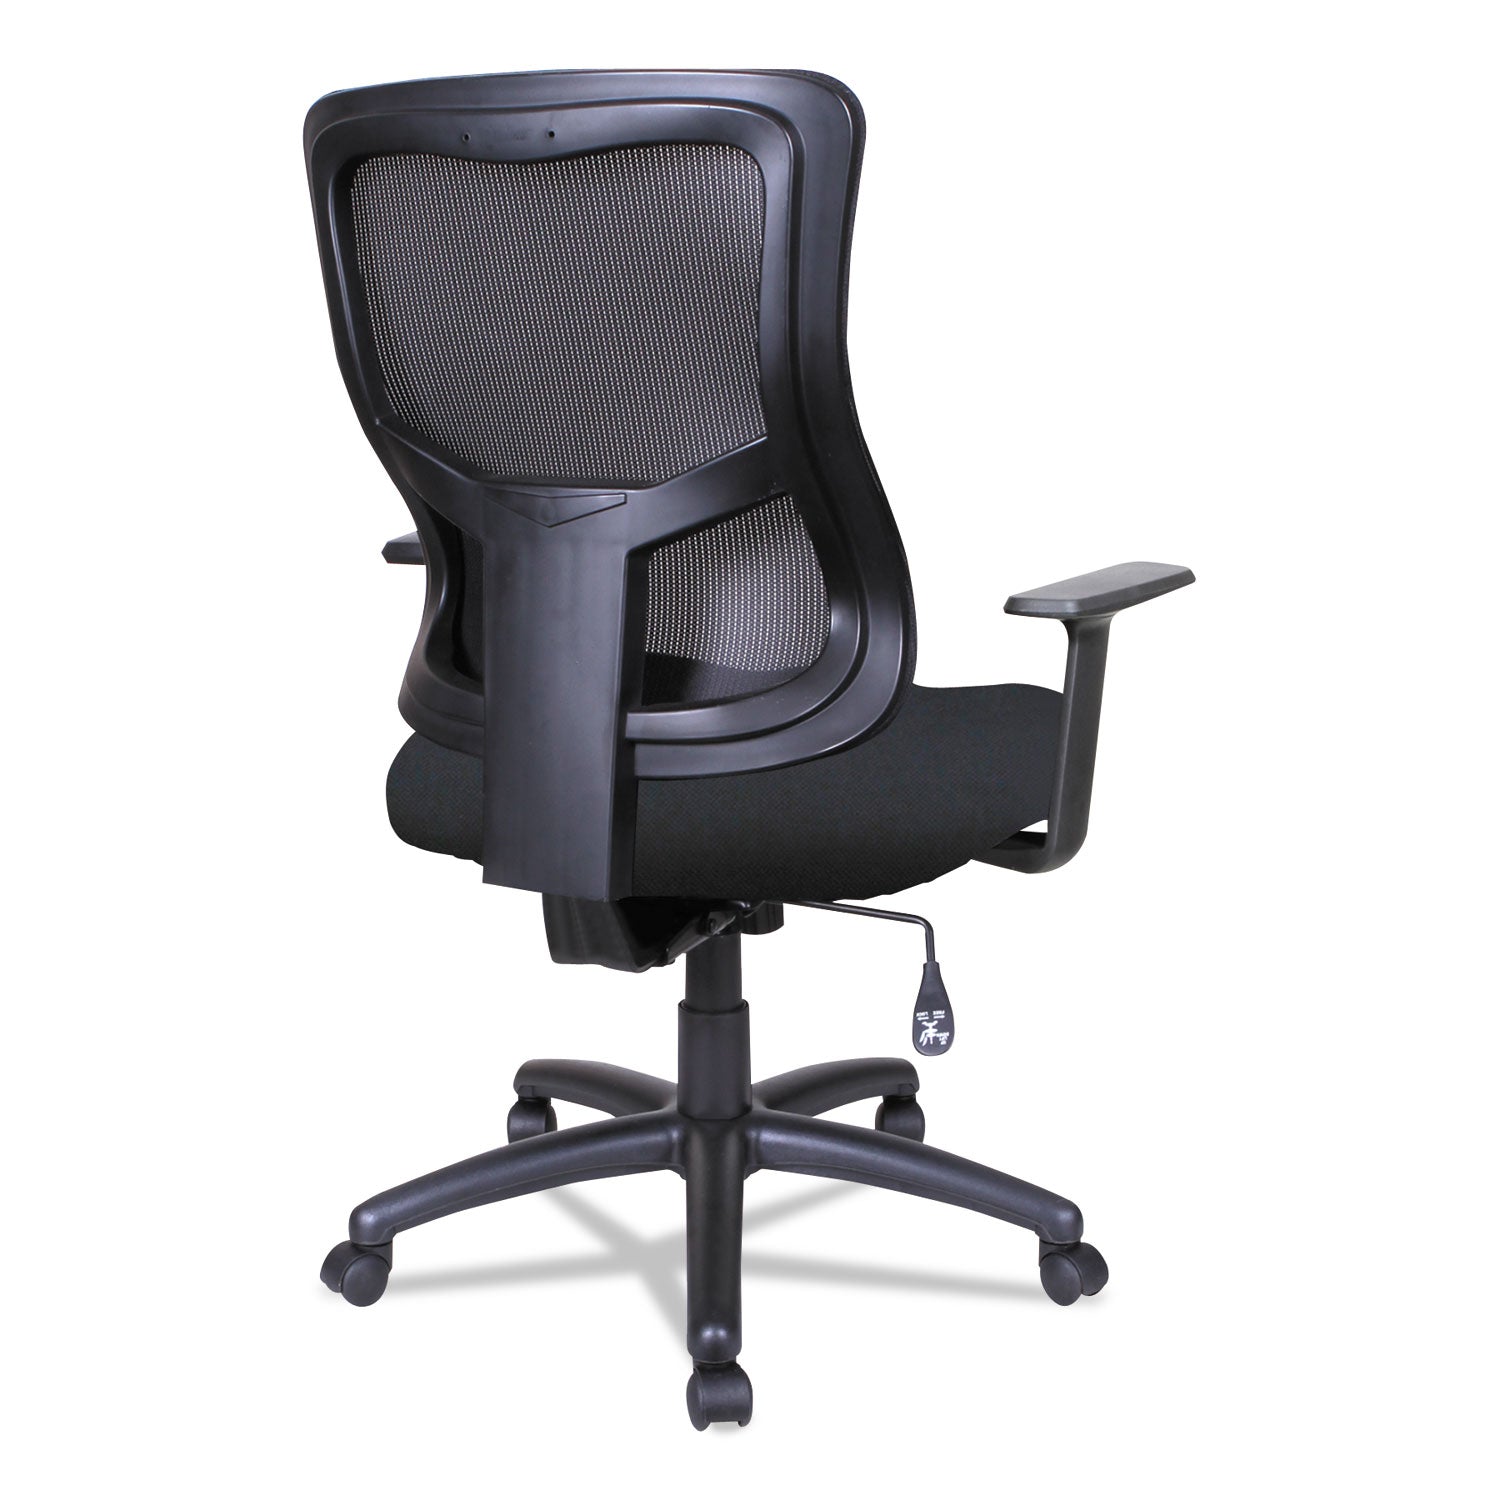 alera-elusion-ii-series-mesh-mid-back-swivel-tilt-chair-supports-up-to-275-lb-1811-to-2177-seat-height-black_aleelt4214b - 5